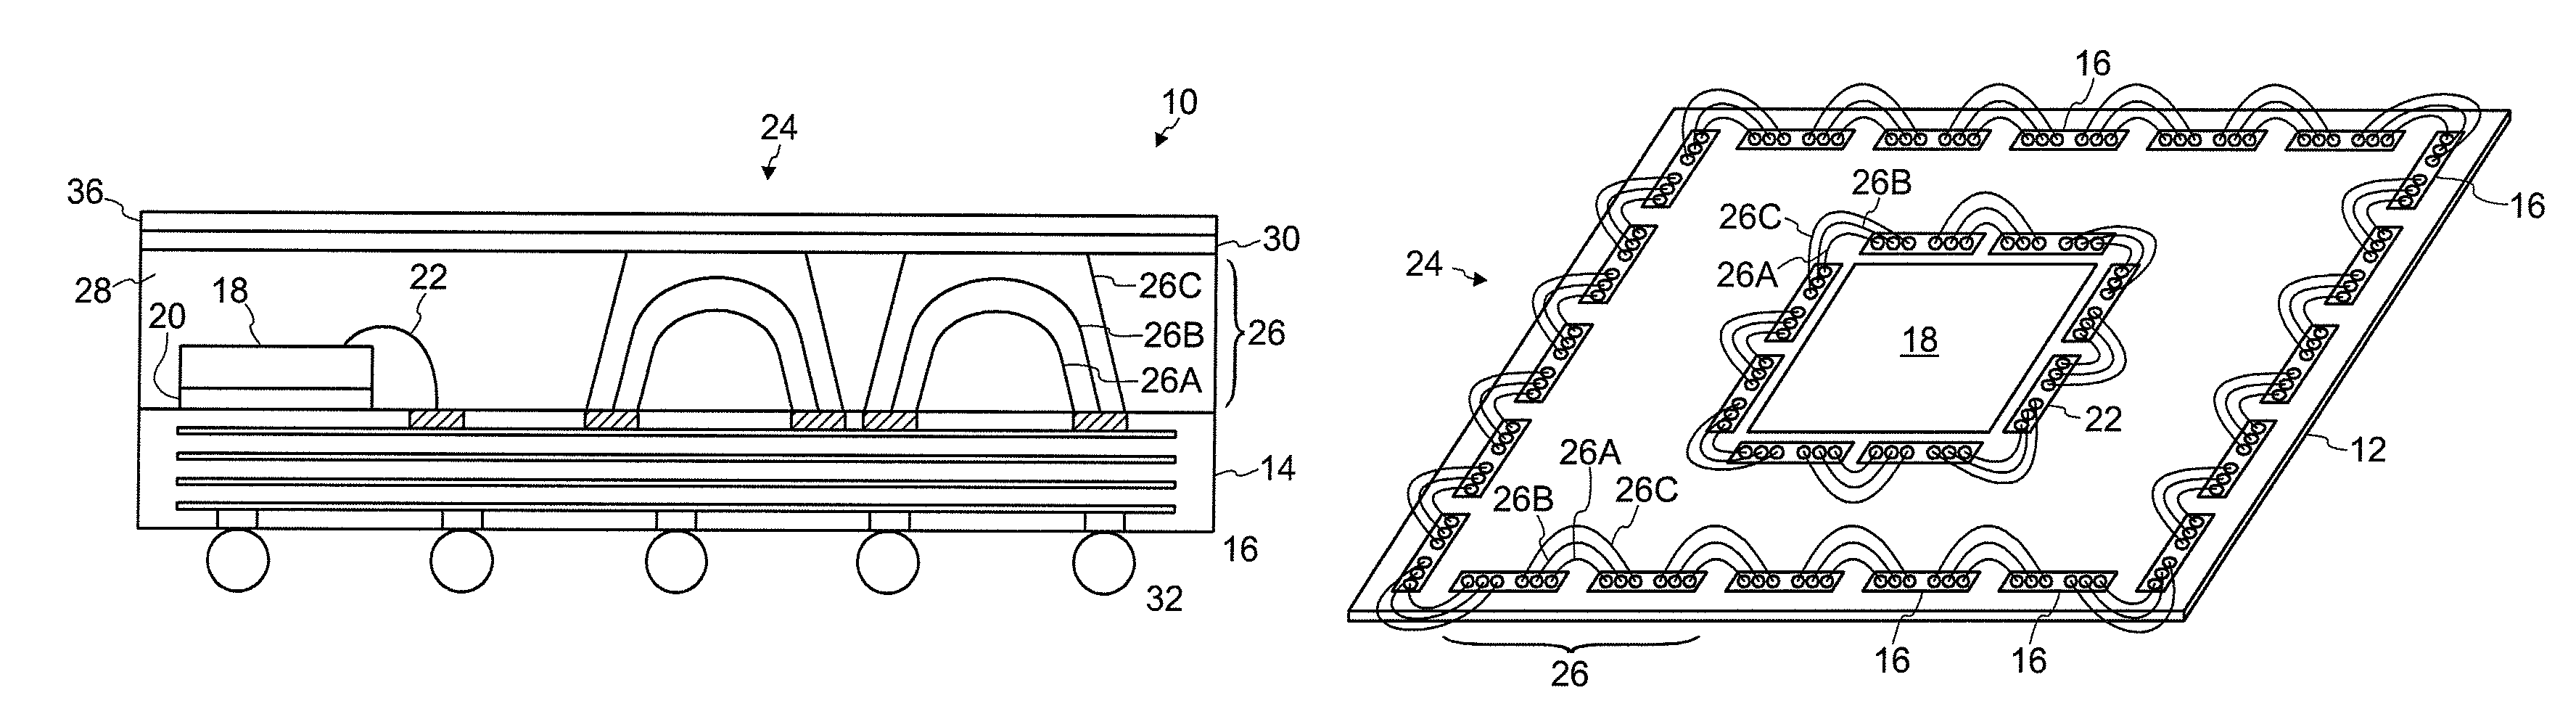 Semiconductor device having EMI shielding and method therefor